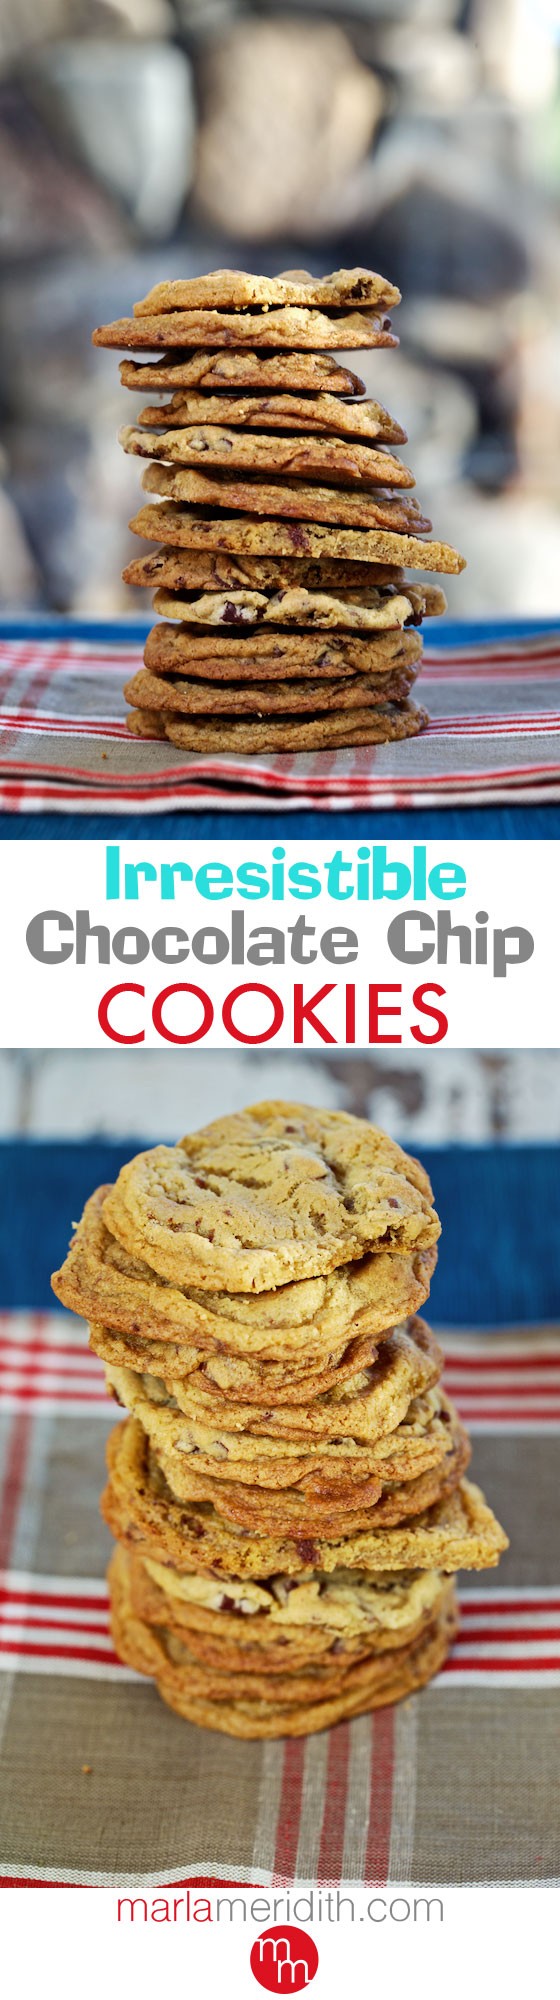 Irresistible Chocolate Chip Cookies | MarlaMeridith.com ( @marlameridith )